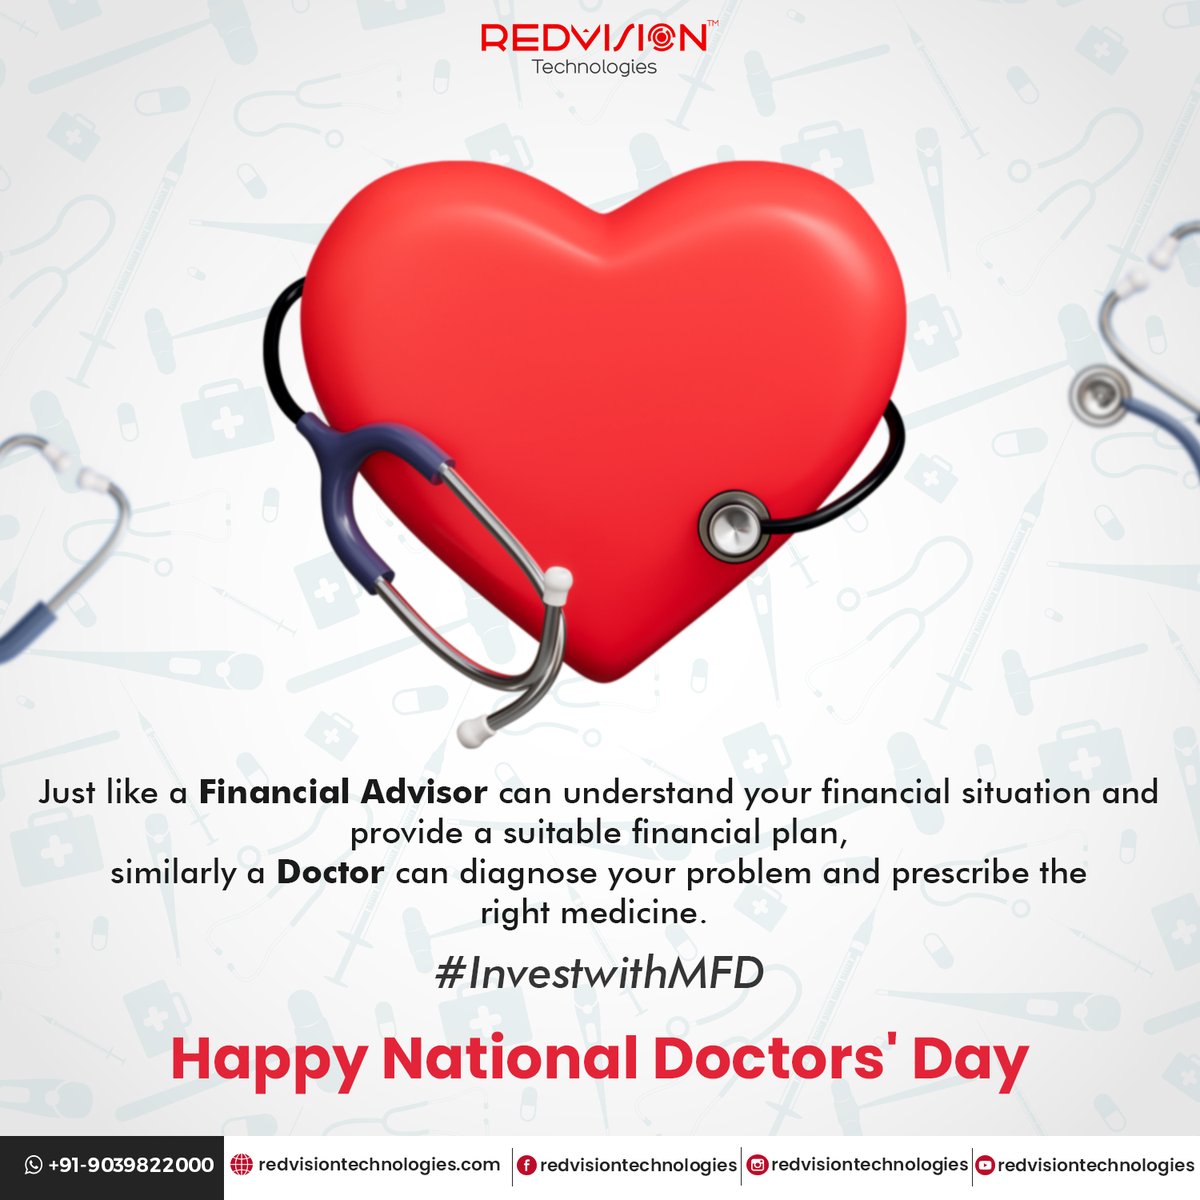 On this special day, let us take a moment to thank our doctors for their invaluable service and for being such an important part of our lives. Happy Doctors Day!
#NationalDoctorsDay2023 #ThankYouDoctors #REDVisionTechnologies #FinanicalAdvisor #Health #financialhealth